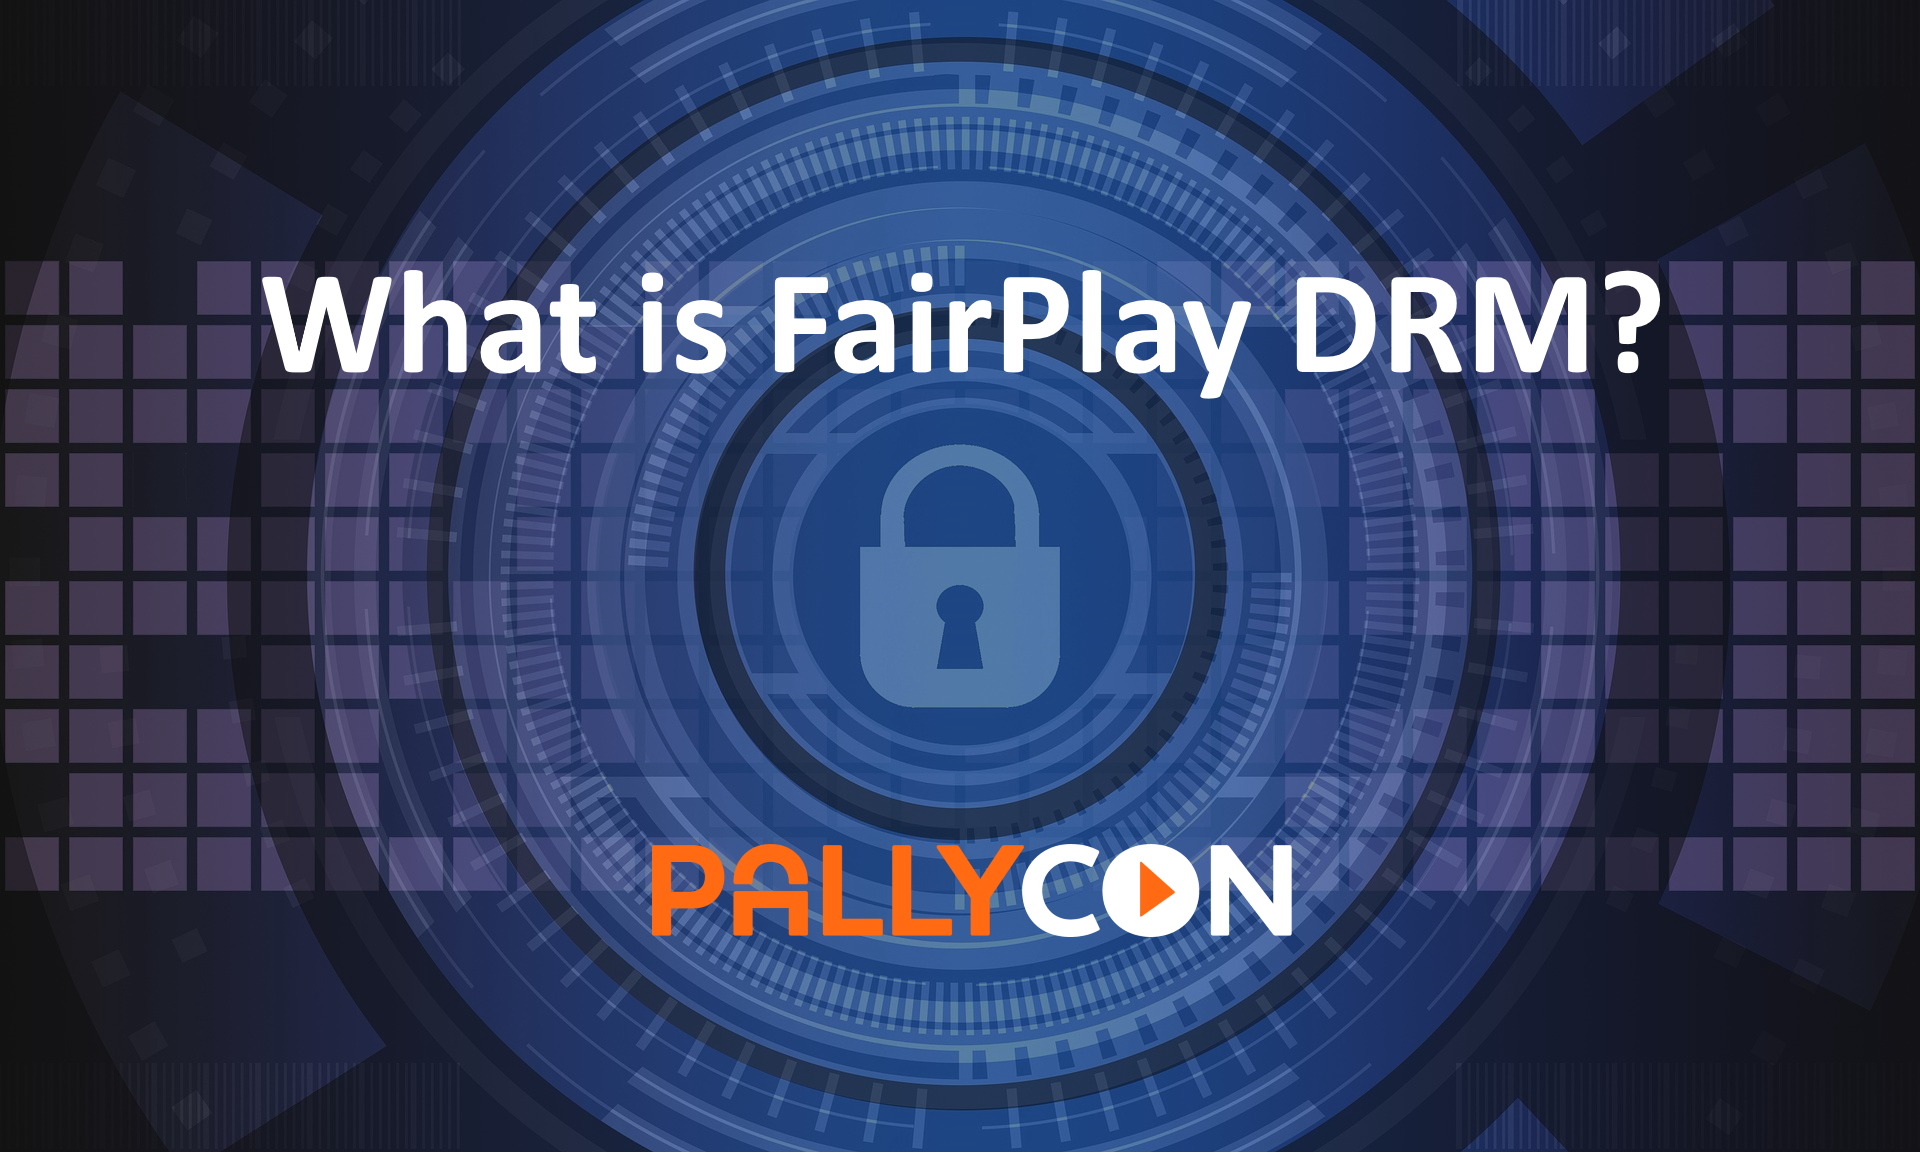 What is Fairplay DRM